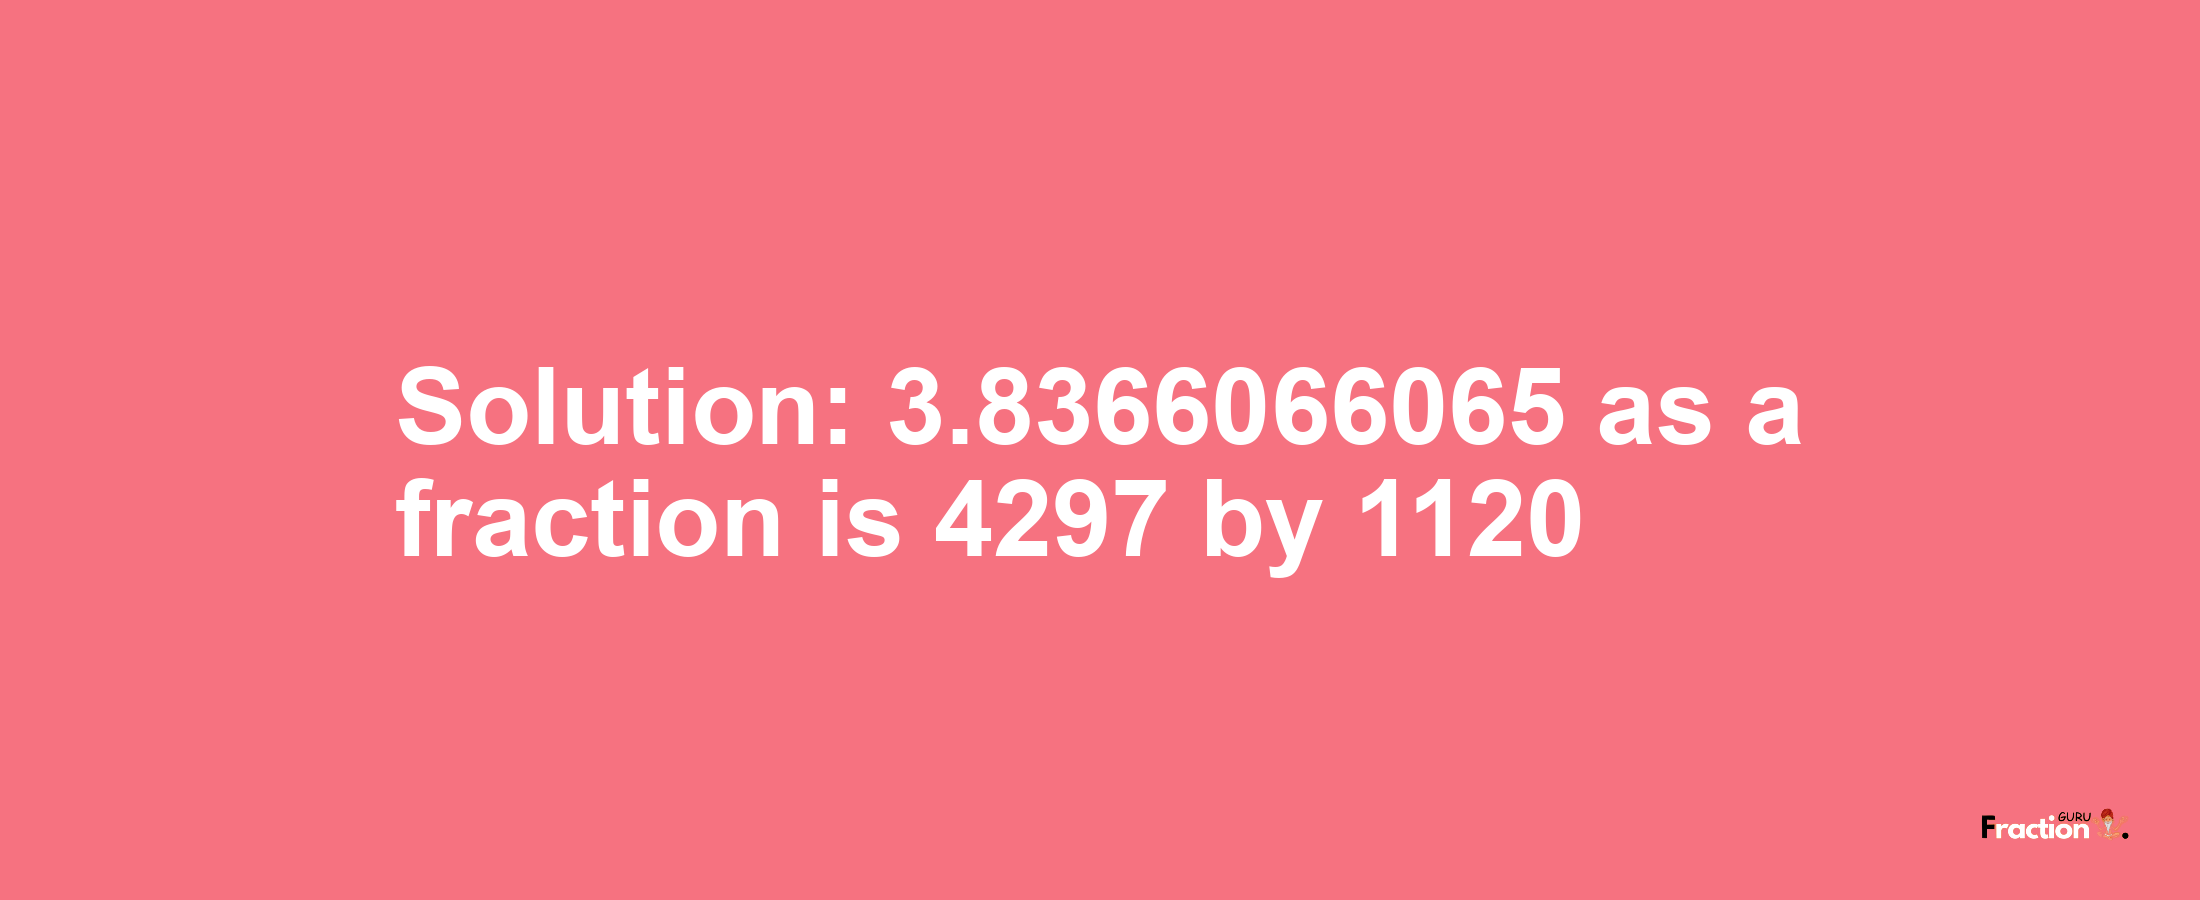 Solution:3.8366066065 as a fraction is 4297/1120